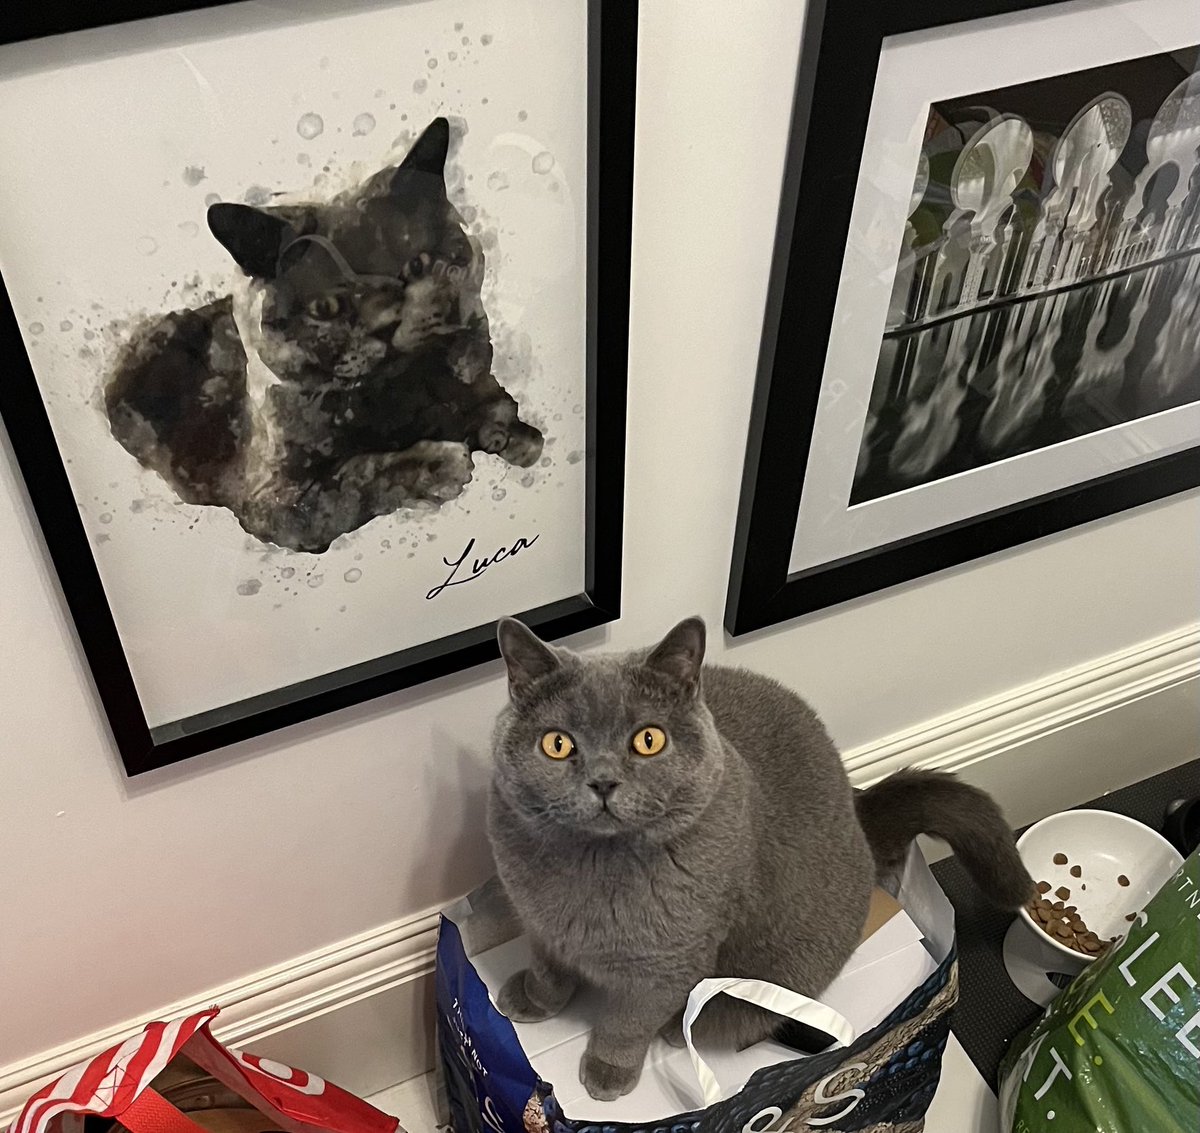 Well who is this distinguished gentleman on the wall? Oh it’s me! 

#Xcats #CatsOnX #CatsofTwitter #CatsOnTwitter